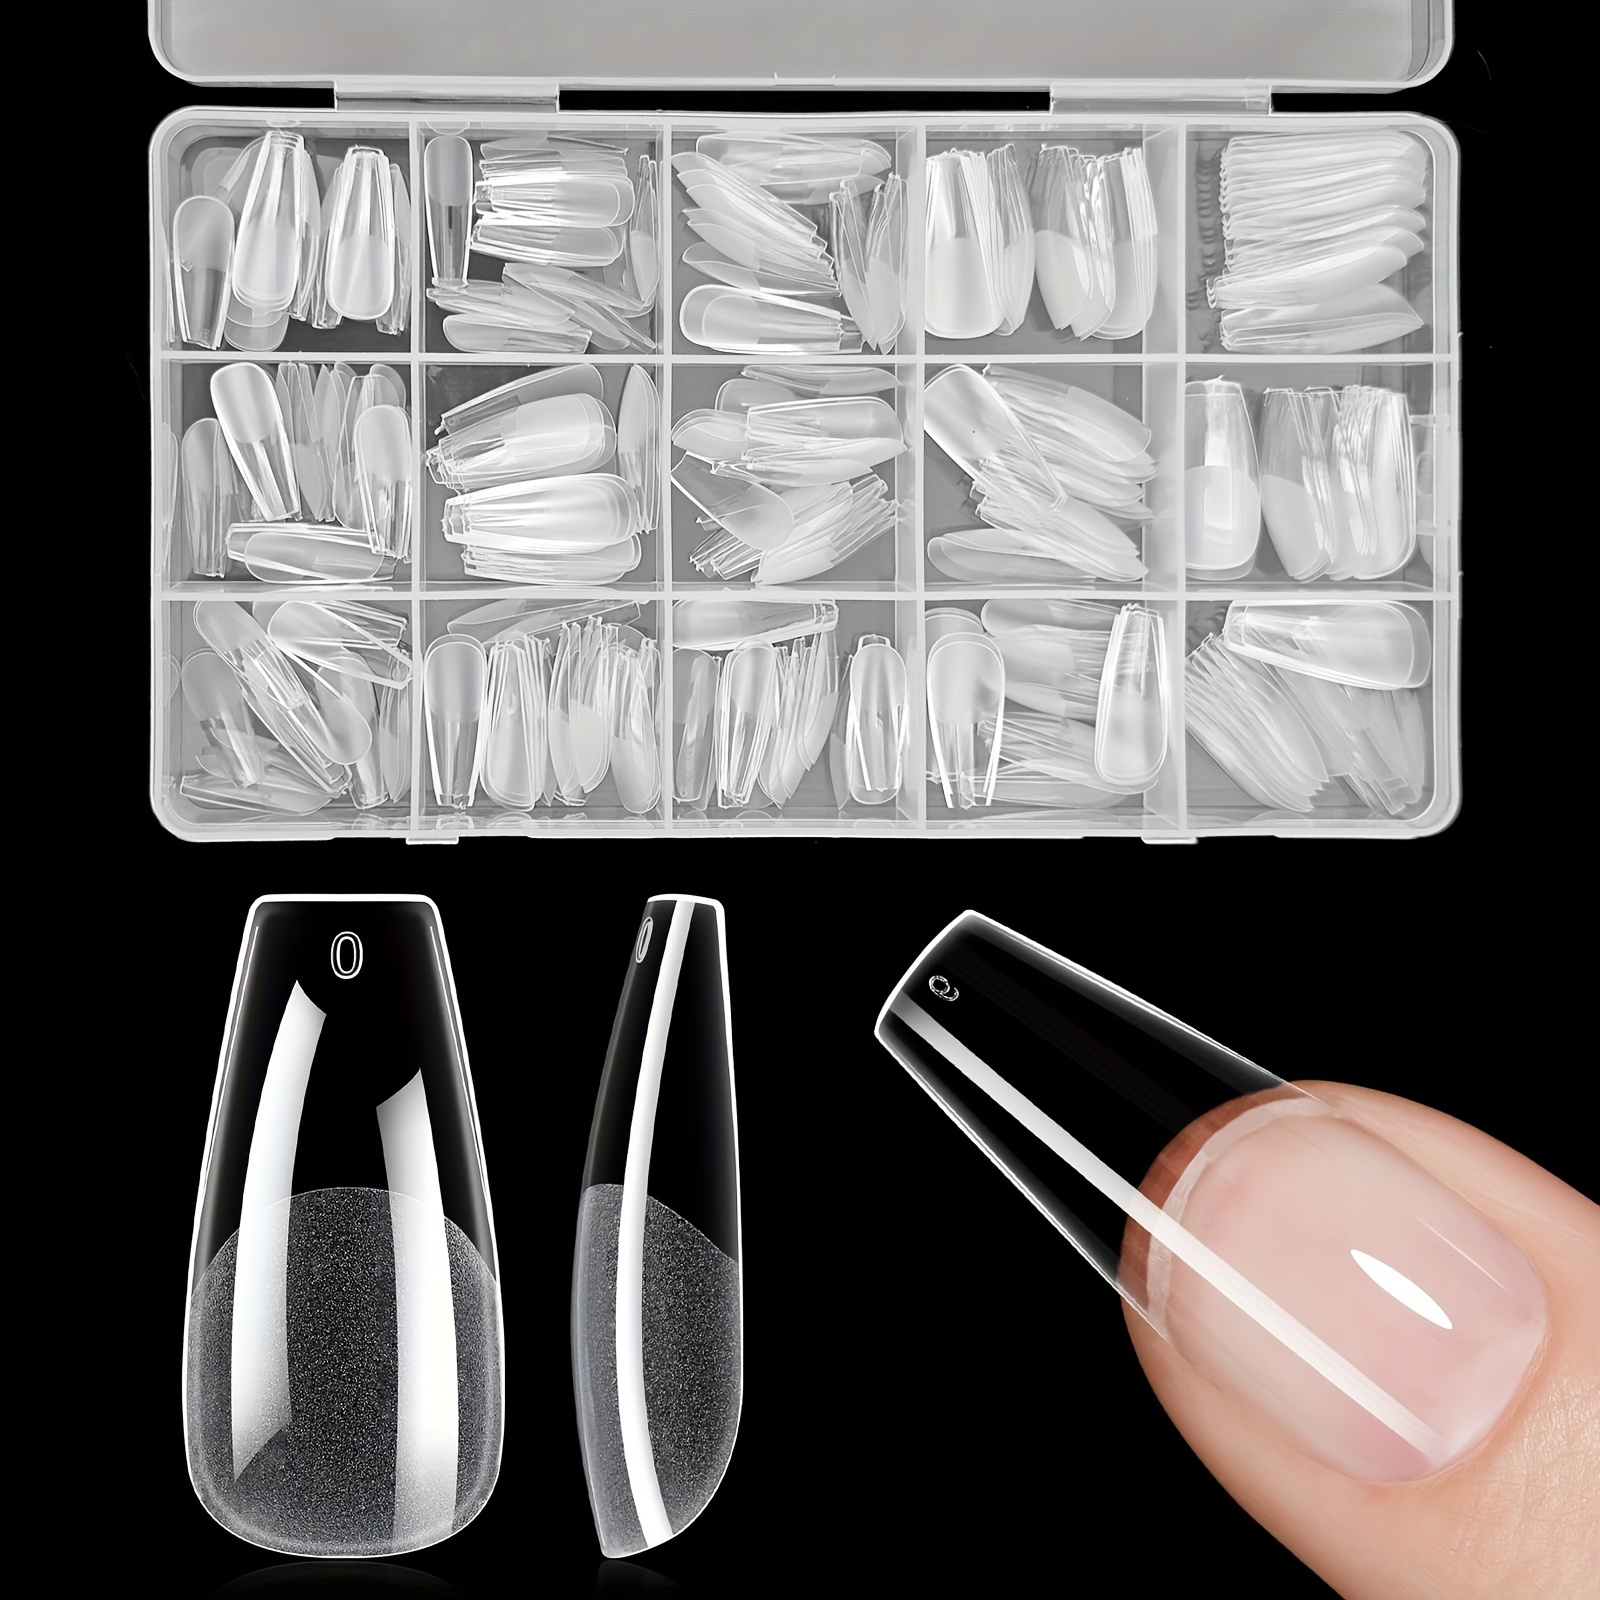 

240/330pcs Medium Coffin Nail Tips, Soft Gel, Half Matte Finish, Full Cover, Medium Long, Clear Acrylic, Pre-shaped, 13 Sizes, False Press-on Nails For Extension, Diy Manicure Salon Quality